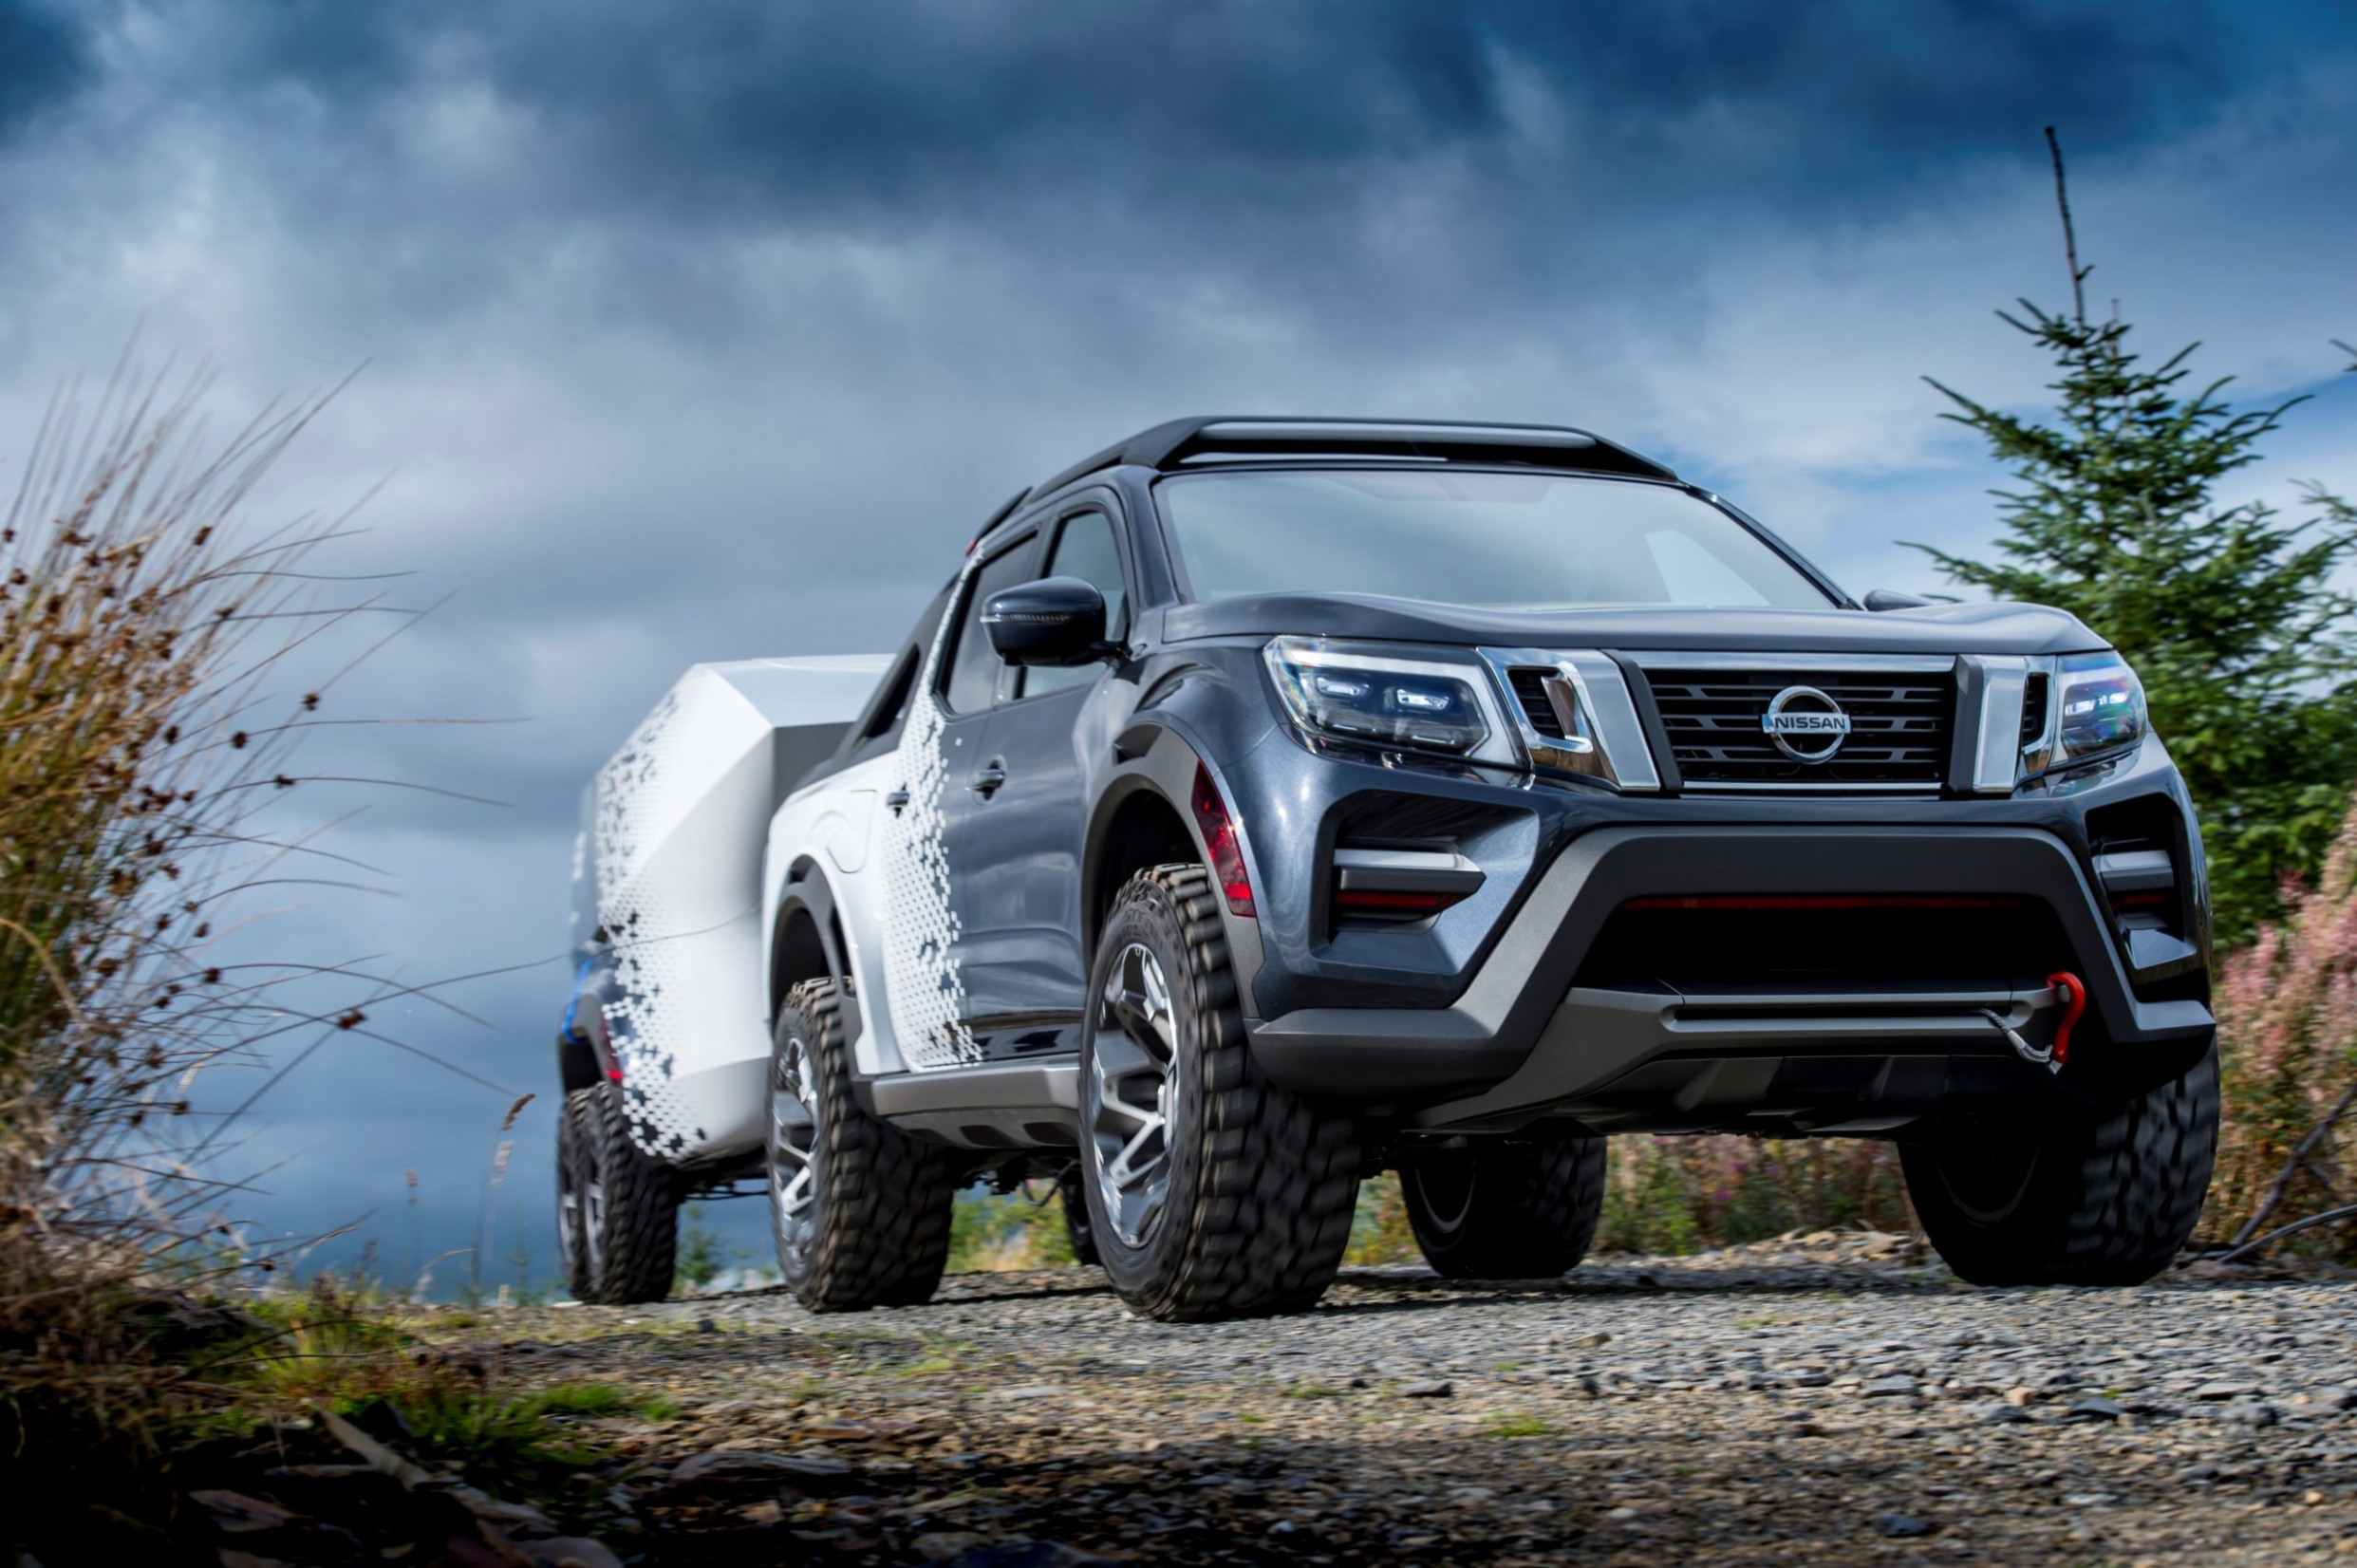 New Model and Performance 2022 Nissan Xterra